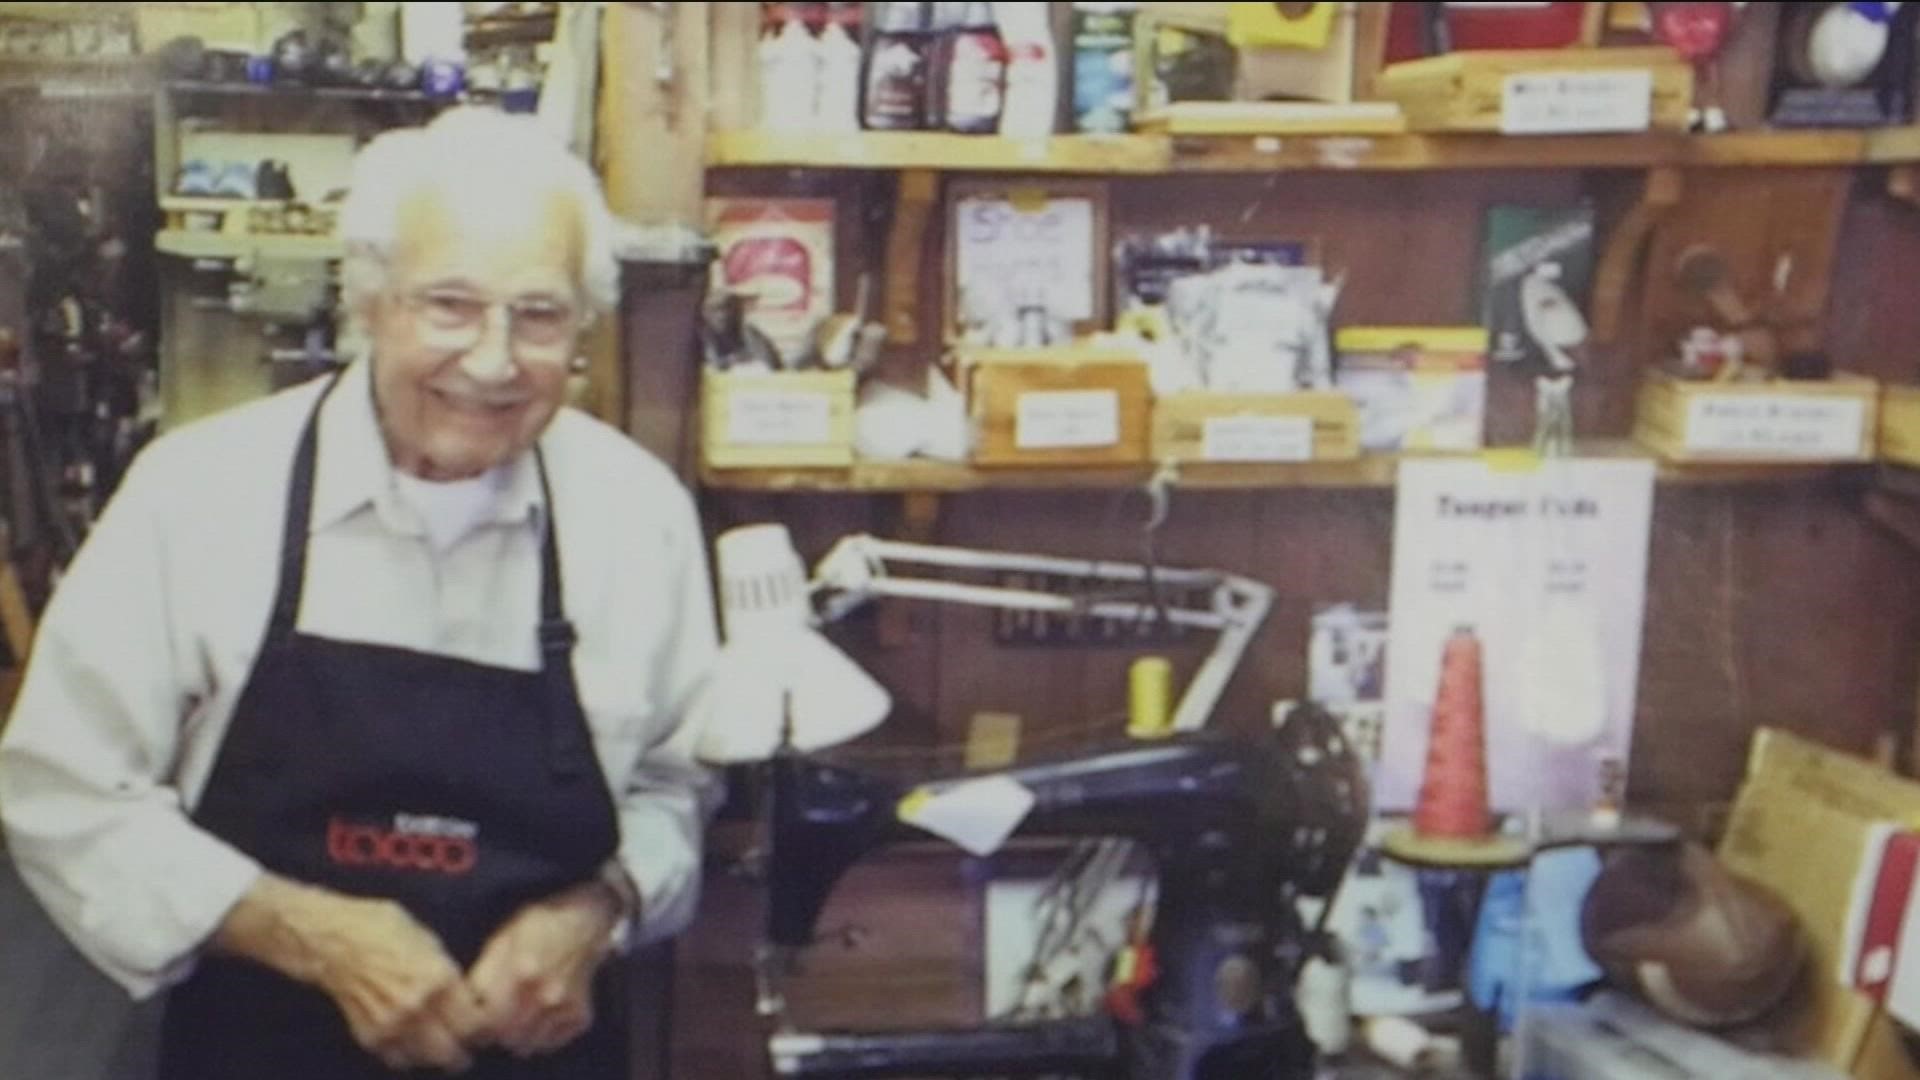 Pasquale and Sons Shoe Repair has stayed in the same location for 75 years. Here's how two brothers are continuing their father's legacy.